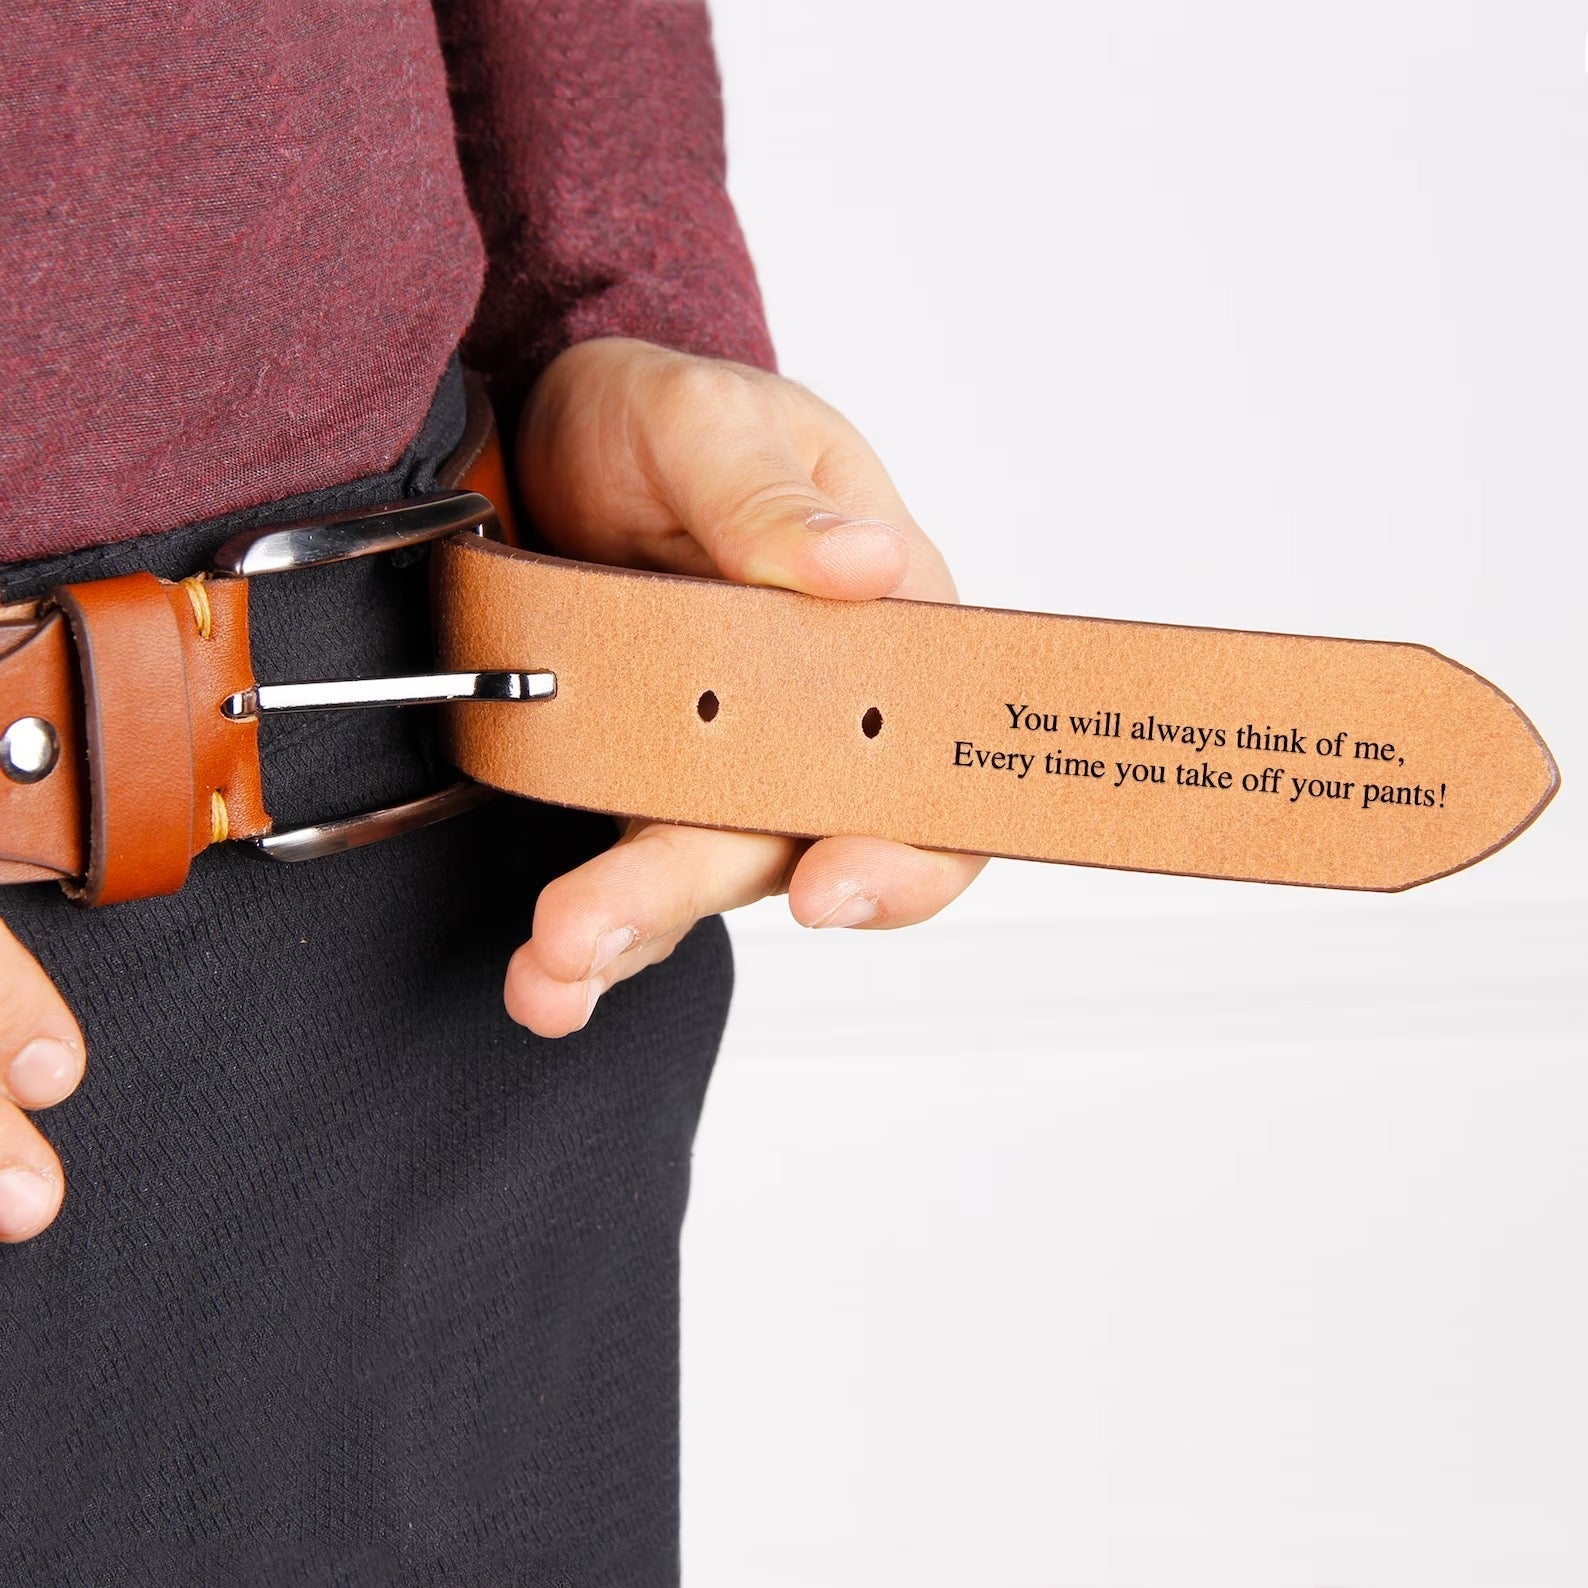 50% OFF⭐️A Custom Belt That Can Stop Men From Cheating😄 For BF/HUSBAND